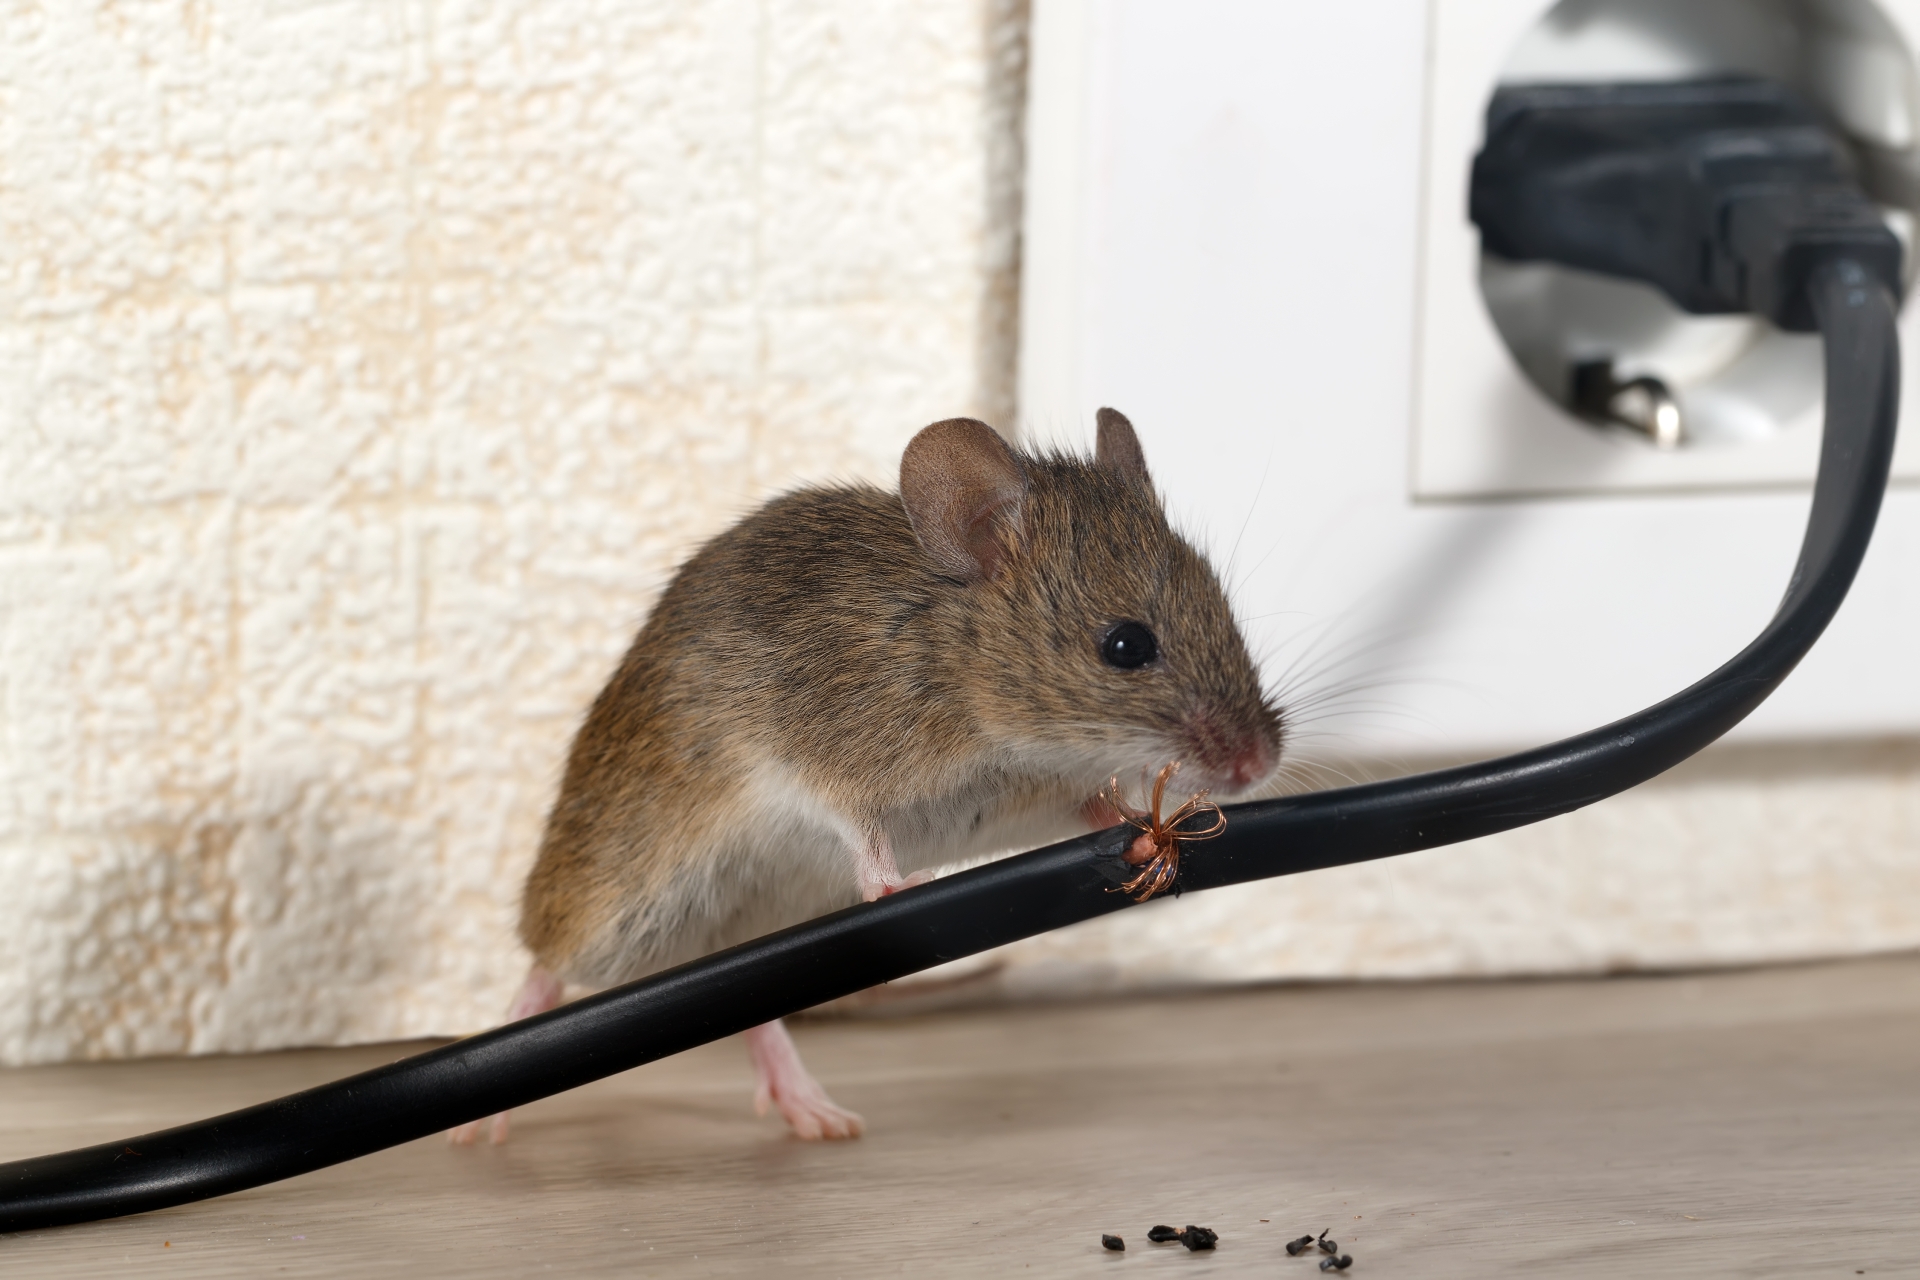 Mice Infestation, Pest Control in Chadwell Heath, Little Heath, RM6. Call Now 020 8166 9746